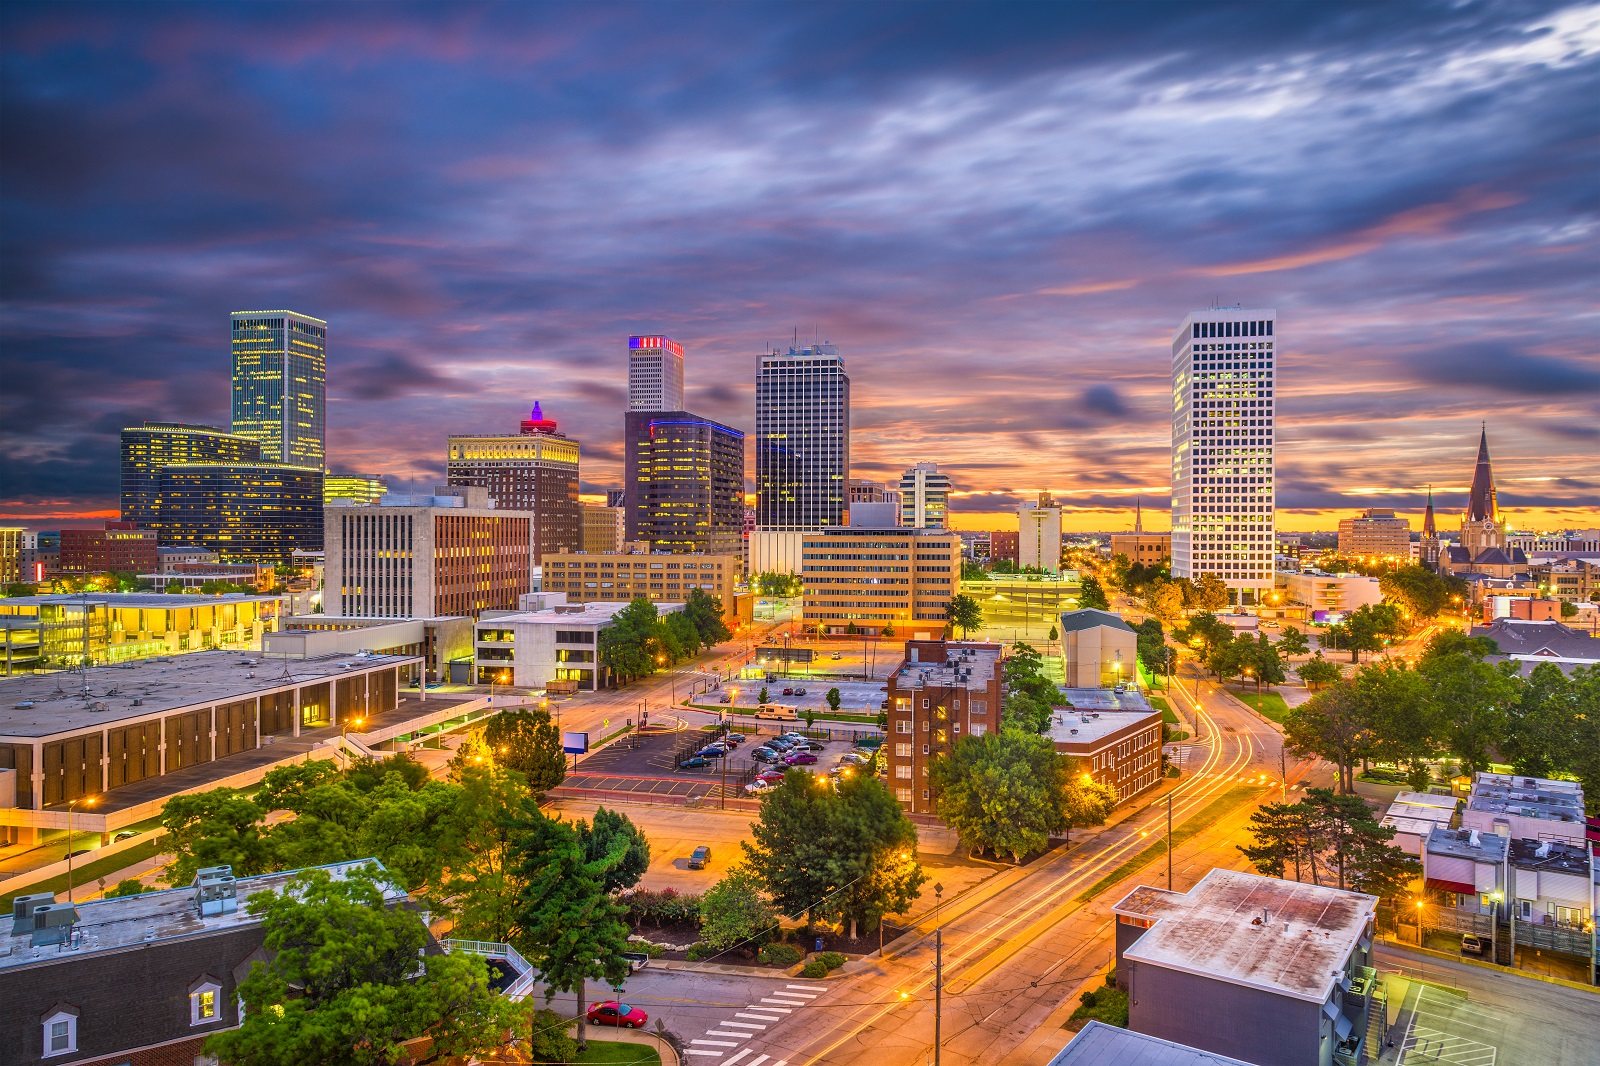 <p class="wp-caption-text">Image Credit: Shutterstock / Sean Pavone</p>  <p><span>Tulsa features an easy-to-navigate road network with less congestion, allowing for a smooth driving experience throughout the city.</span></p>